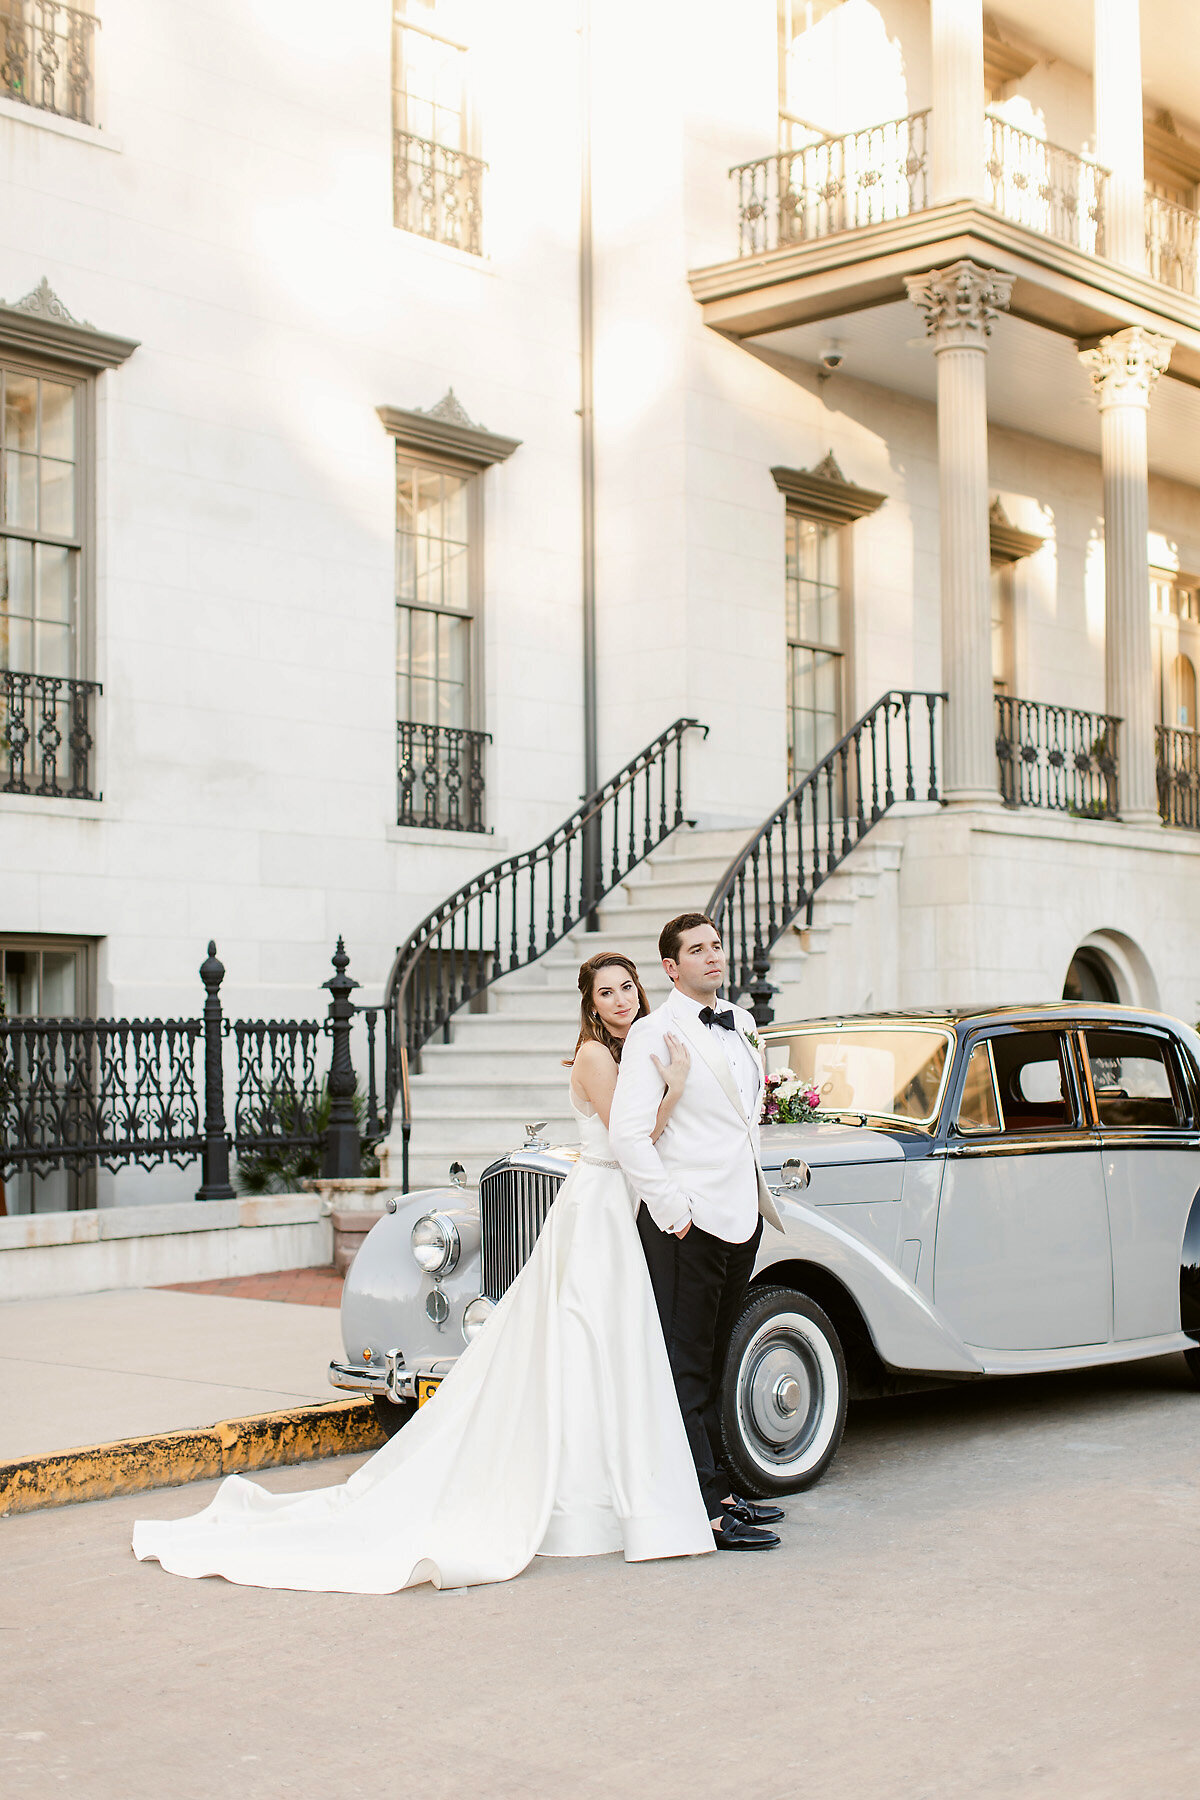 Bride and groom sanding in front of rolls royse.